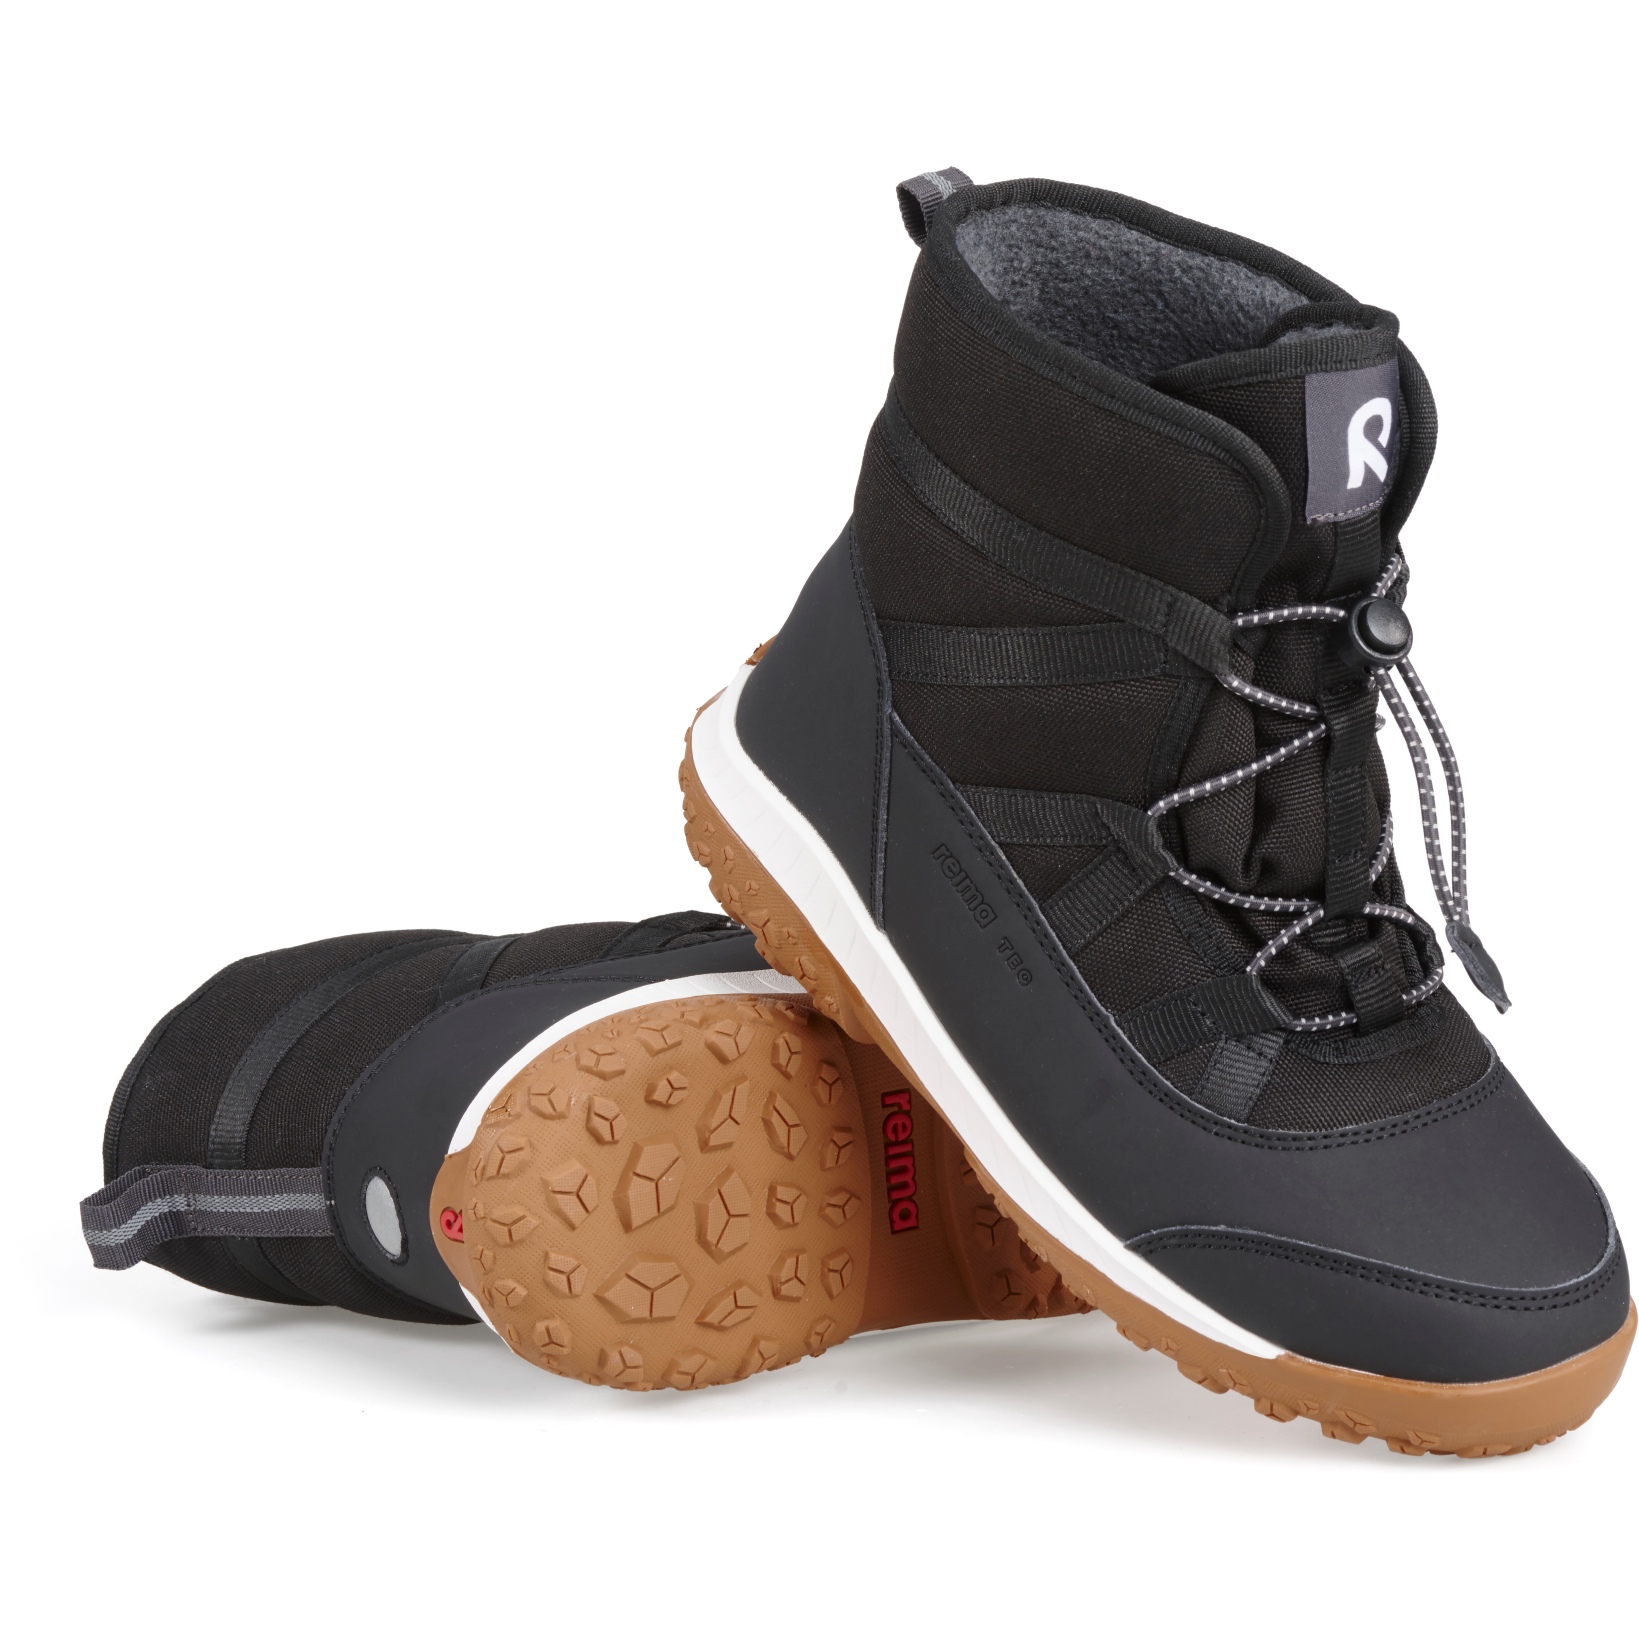 Picture of Reima Myrsky Winter Boots Junior - black 9990